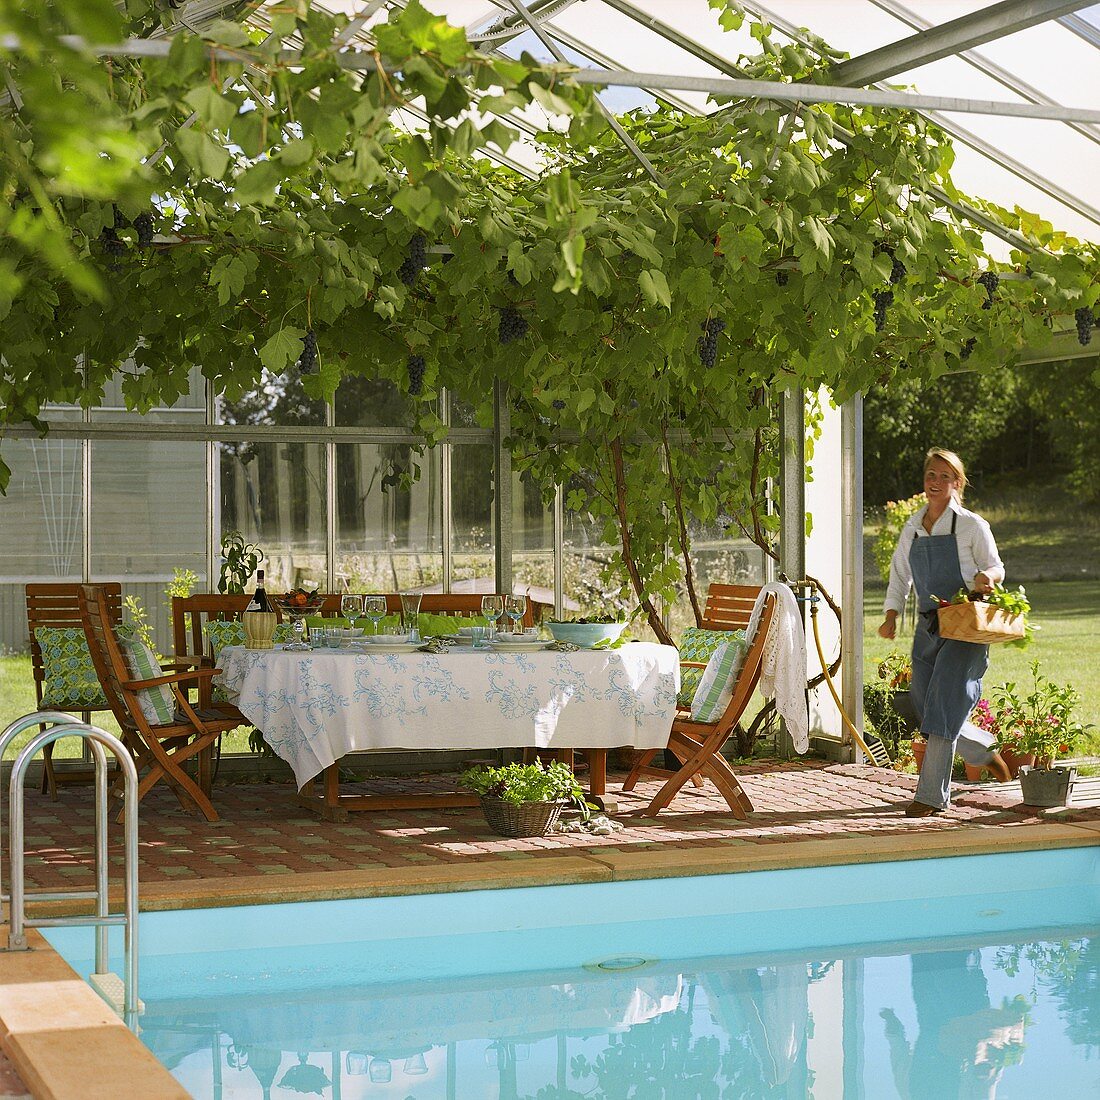 Laid table by pool and young woman wearing gardening apron